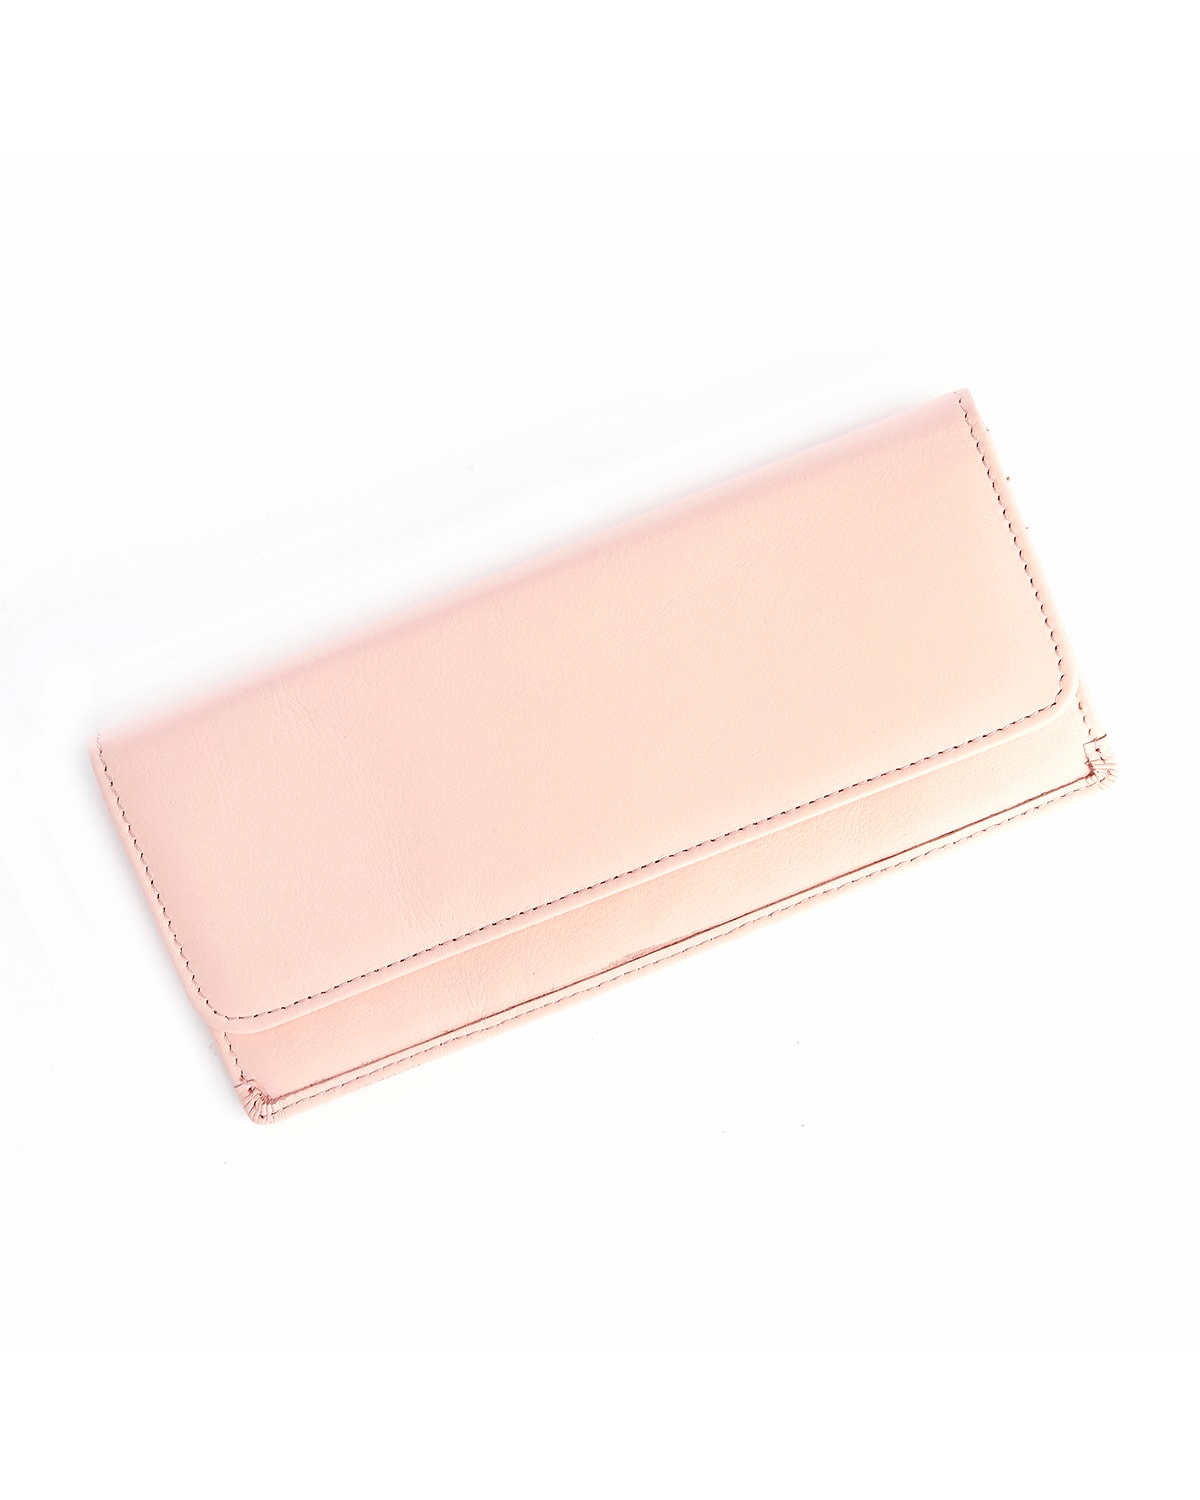 Royce New York Rfid Blocking Clutch Wallet, Personalized In Pink